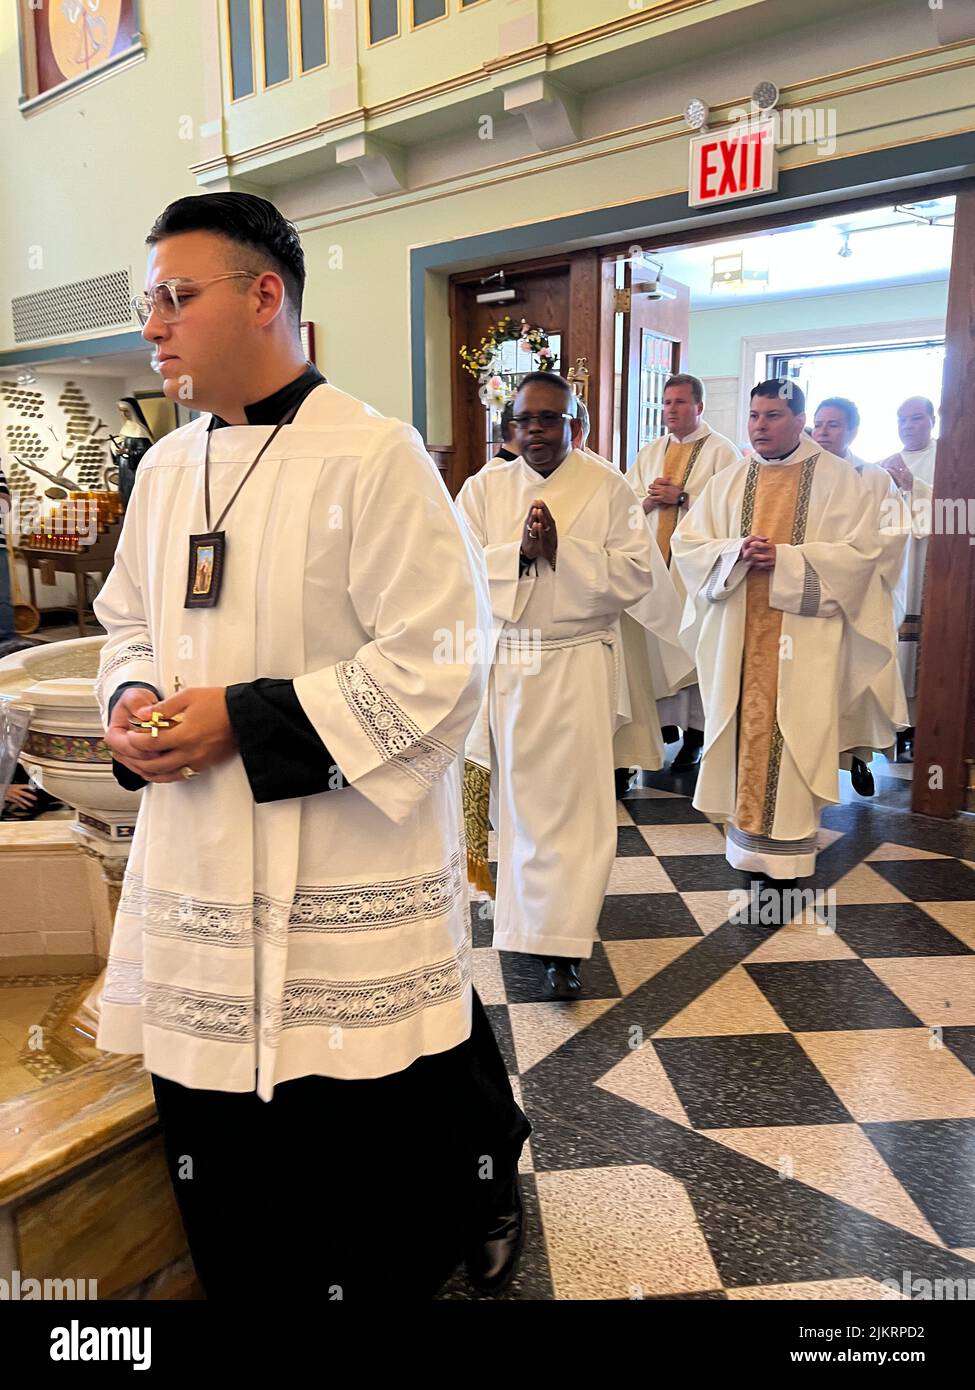 Clergy procession to the alter for mass at Our Lady of Mount Saint Carmel in Williamsburg Brooklyn; New York. Stock Photo